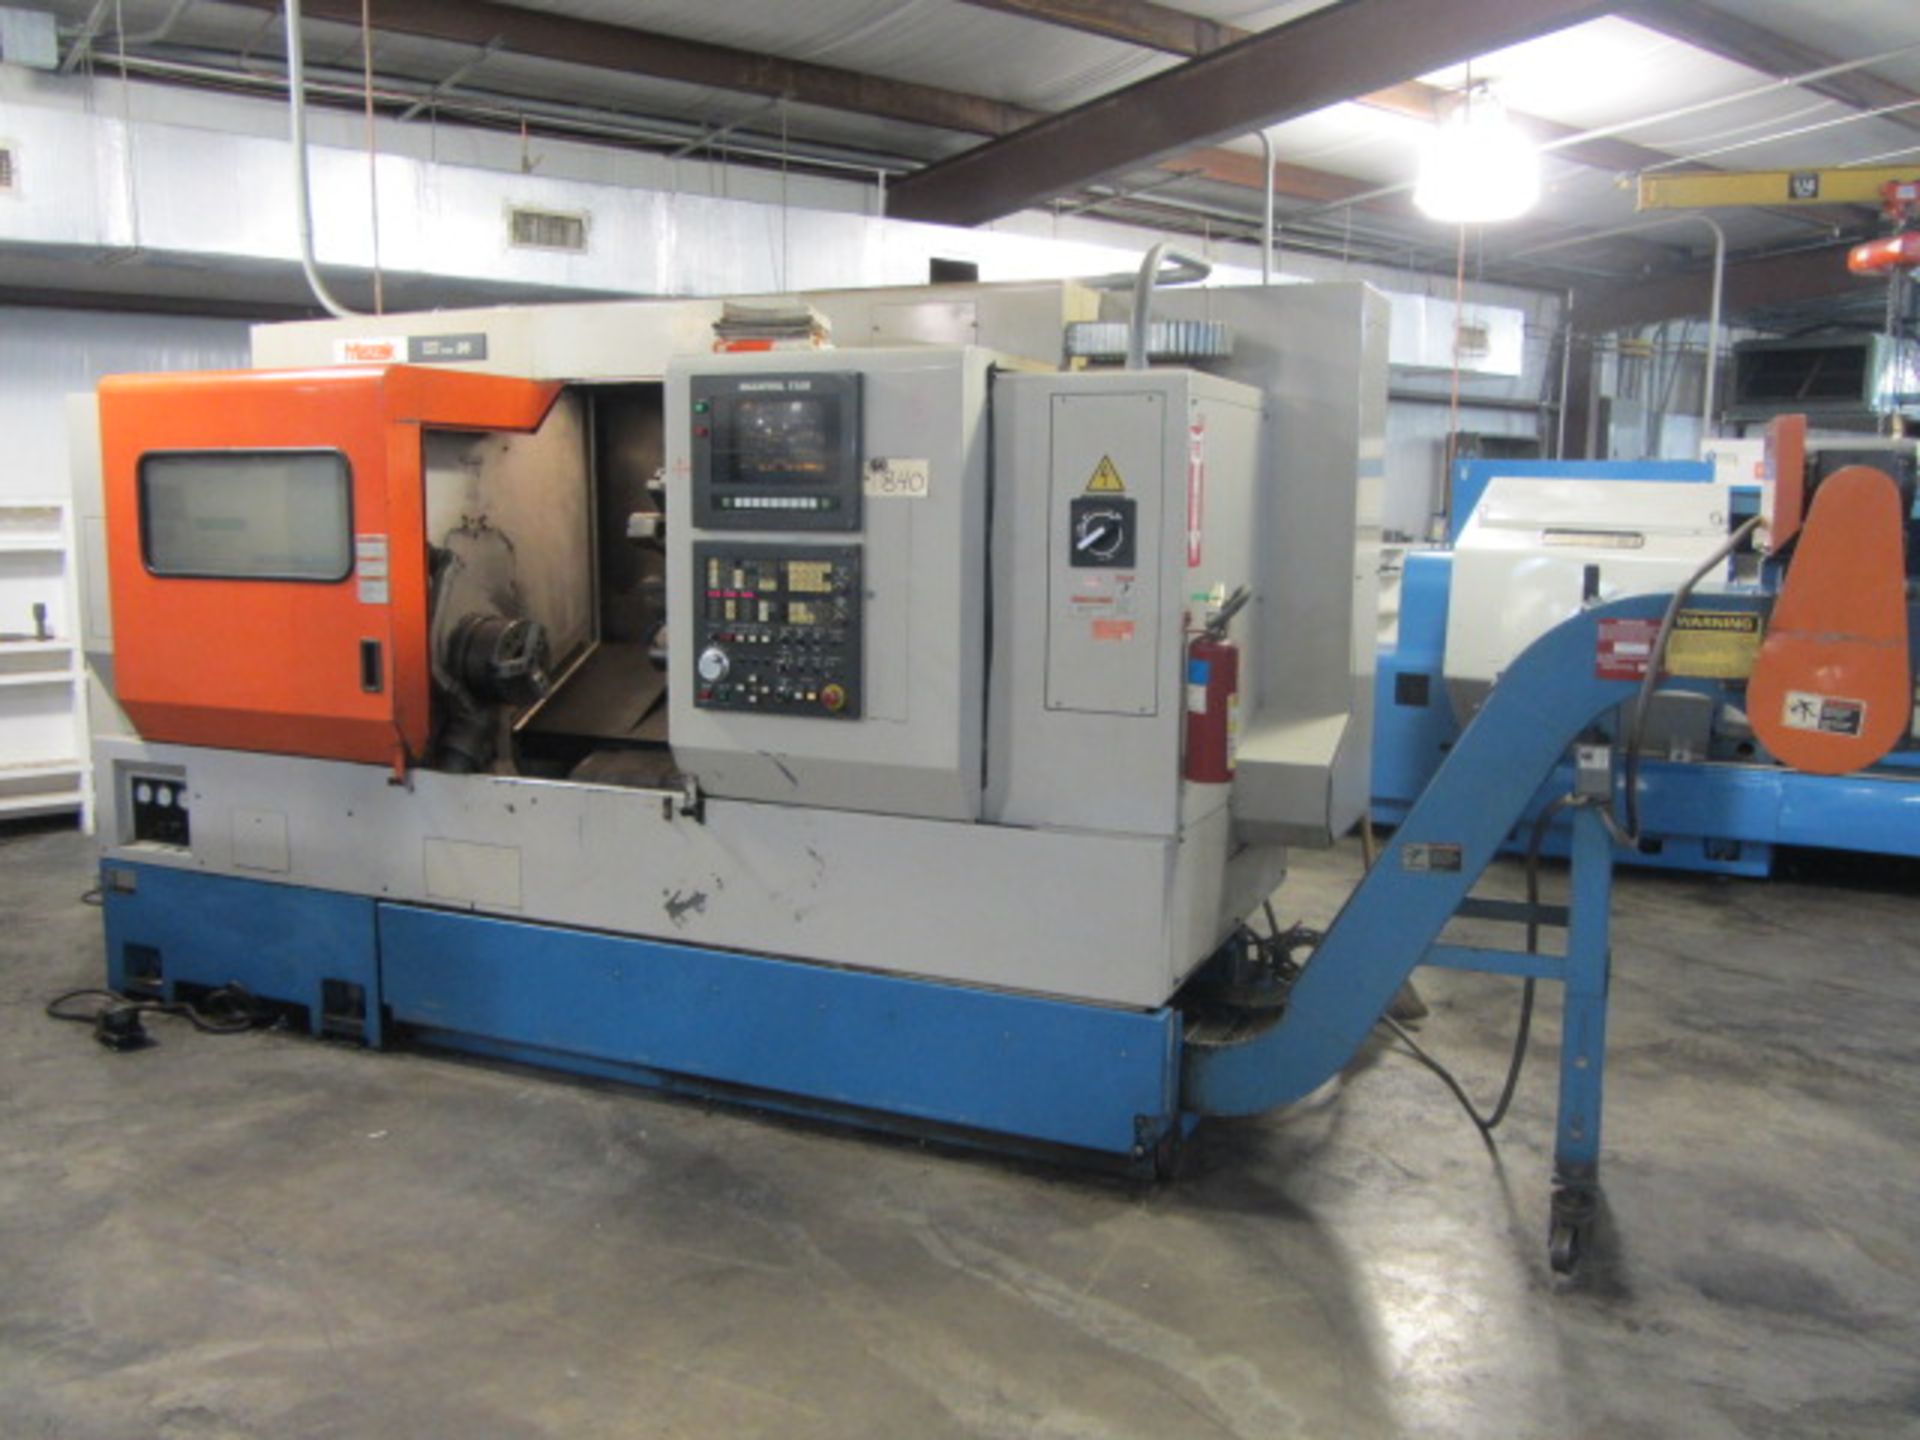 Mazak Model Super Quick Turn 28 2-Axis CNC Turning Center with 20.08'' Swing Over Bed x 40''